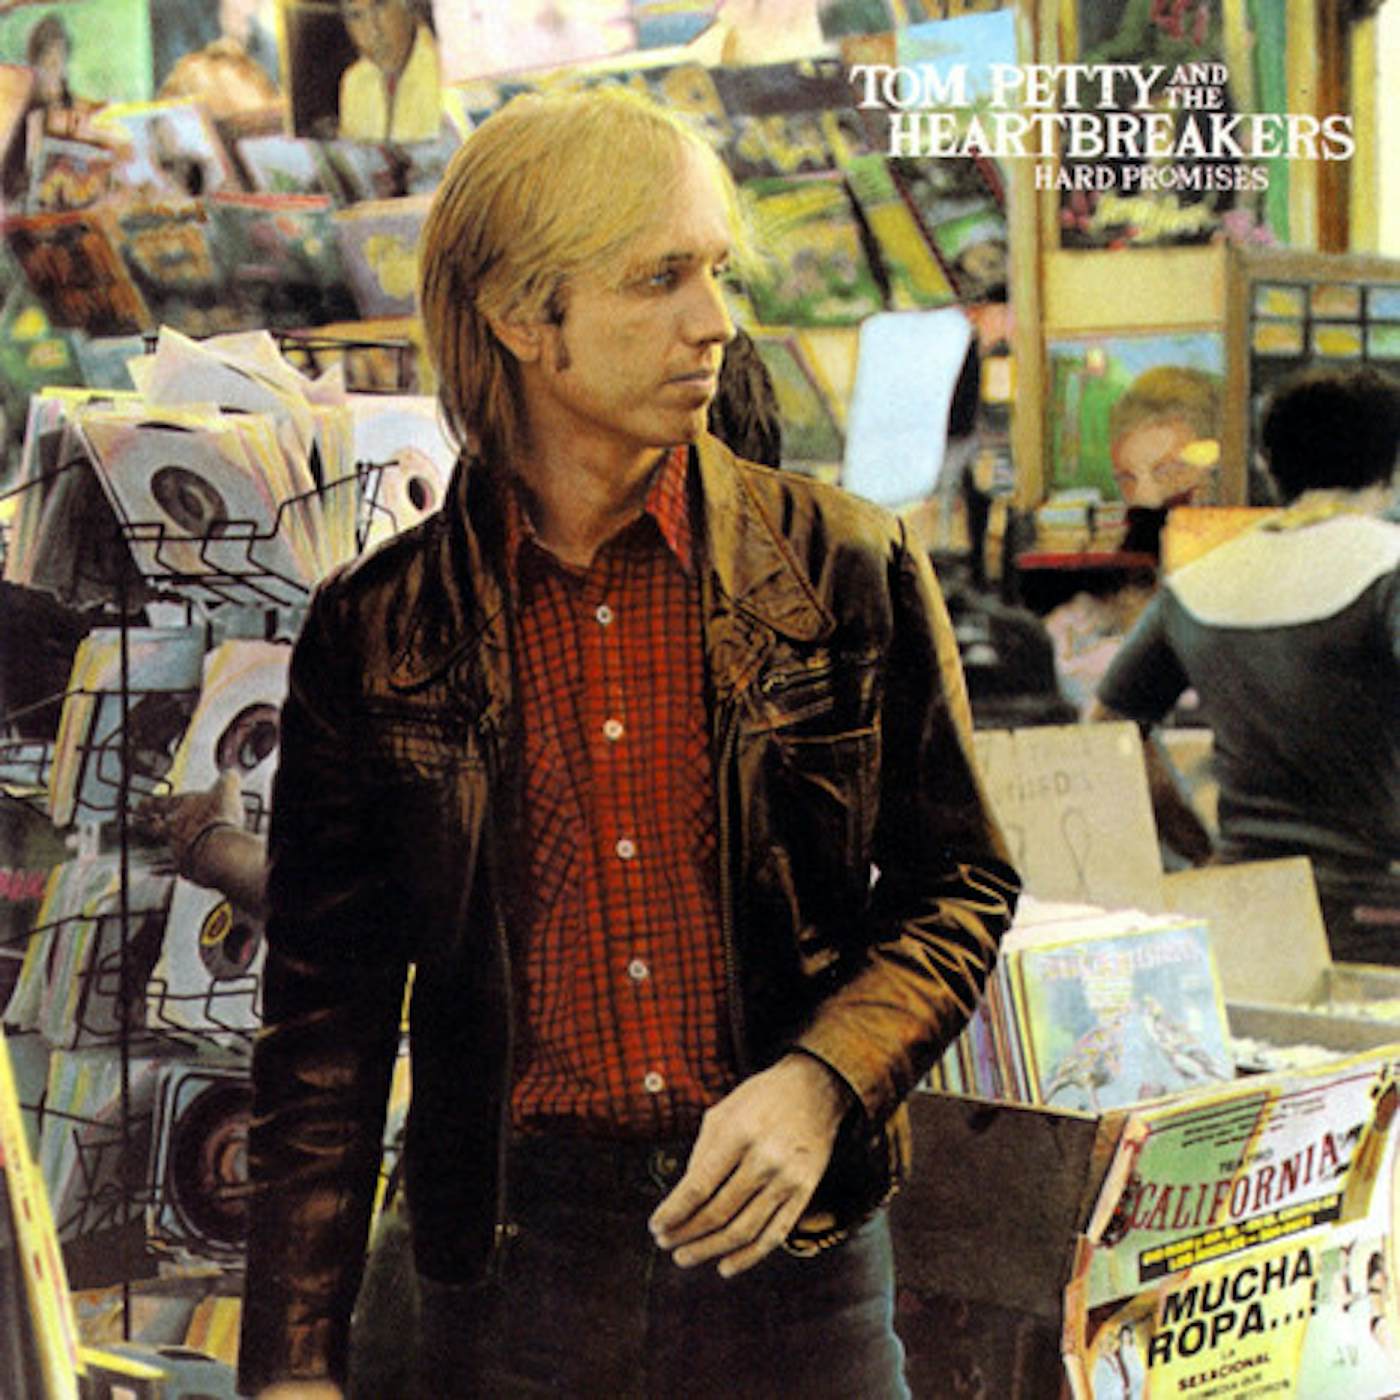 Tom Petty and the Heartbreakers Hard Promises Vinyl Record